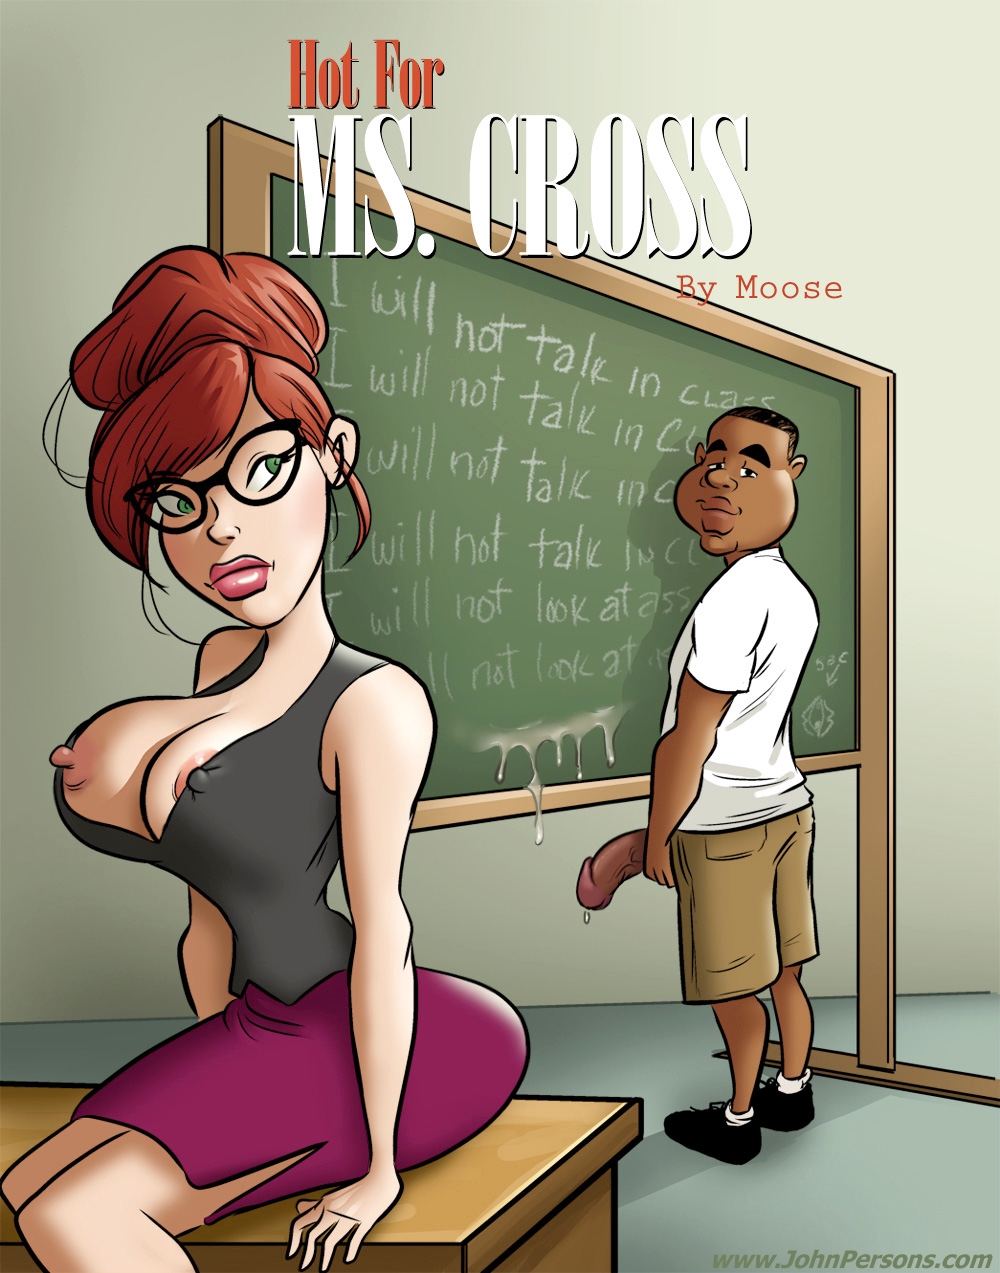 John Persons - Hot For MS. Cross